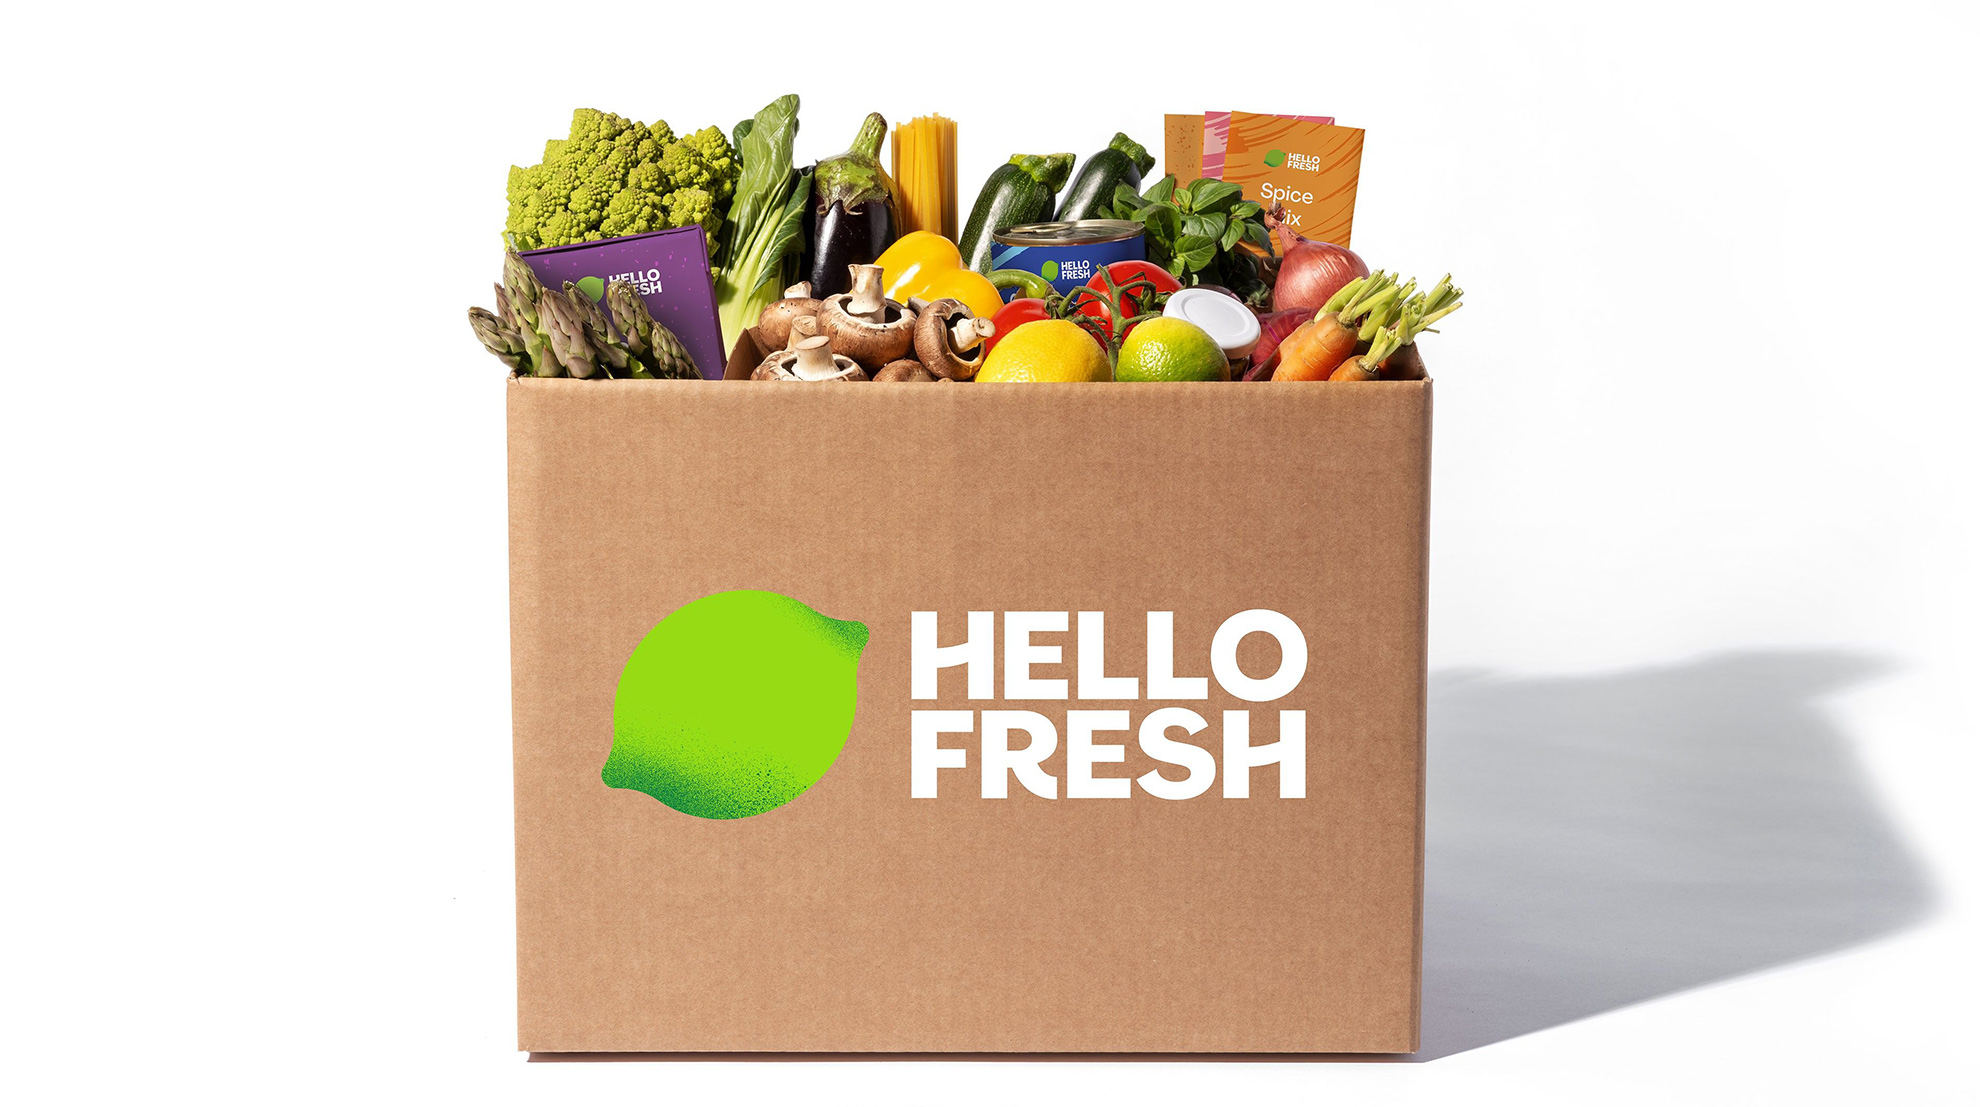 Here’s How To Claim Your HelloFresh Discount From Newbie Deals - Halk Haber